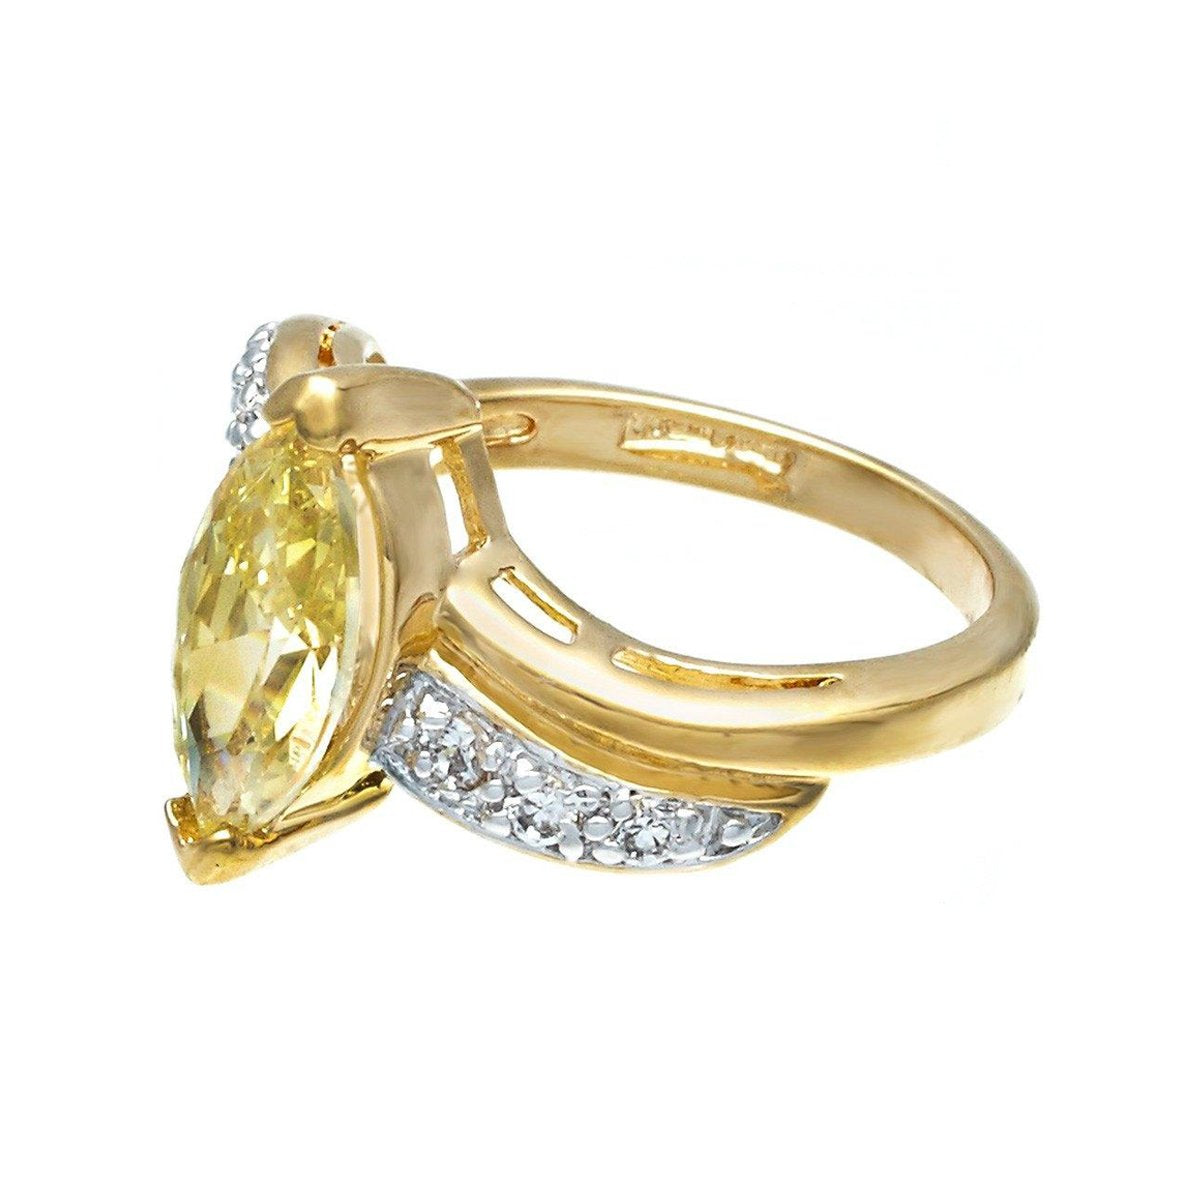 Classic Solitaire Marquise Yellow Stone Statement Ring